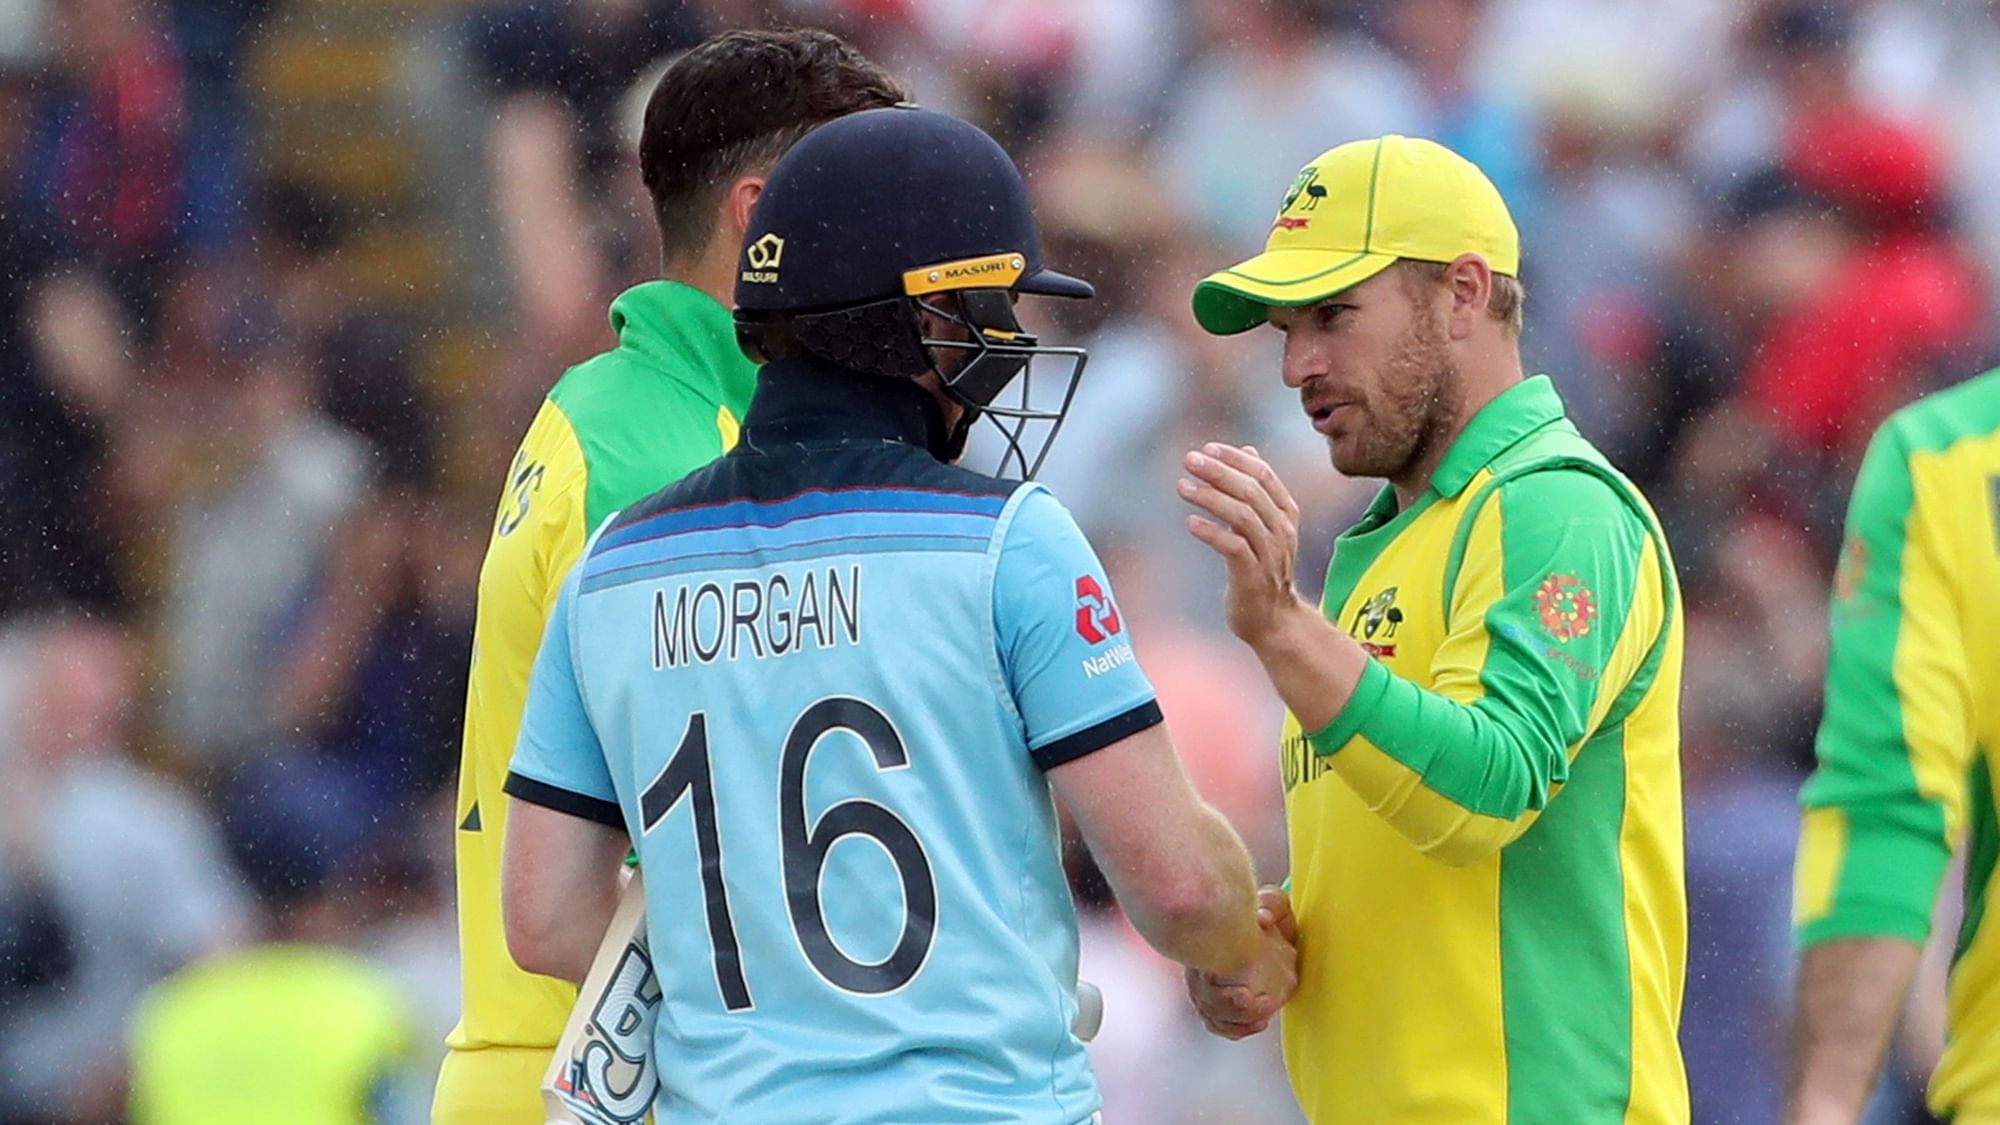 England’s captain Eoin Morgan, left, shakes hands with Australia’s captain Aaron Finch, right, after winning the Cricket World Cup semi-final match between England and Australia at Edgbaston.